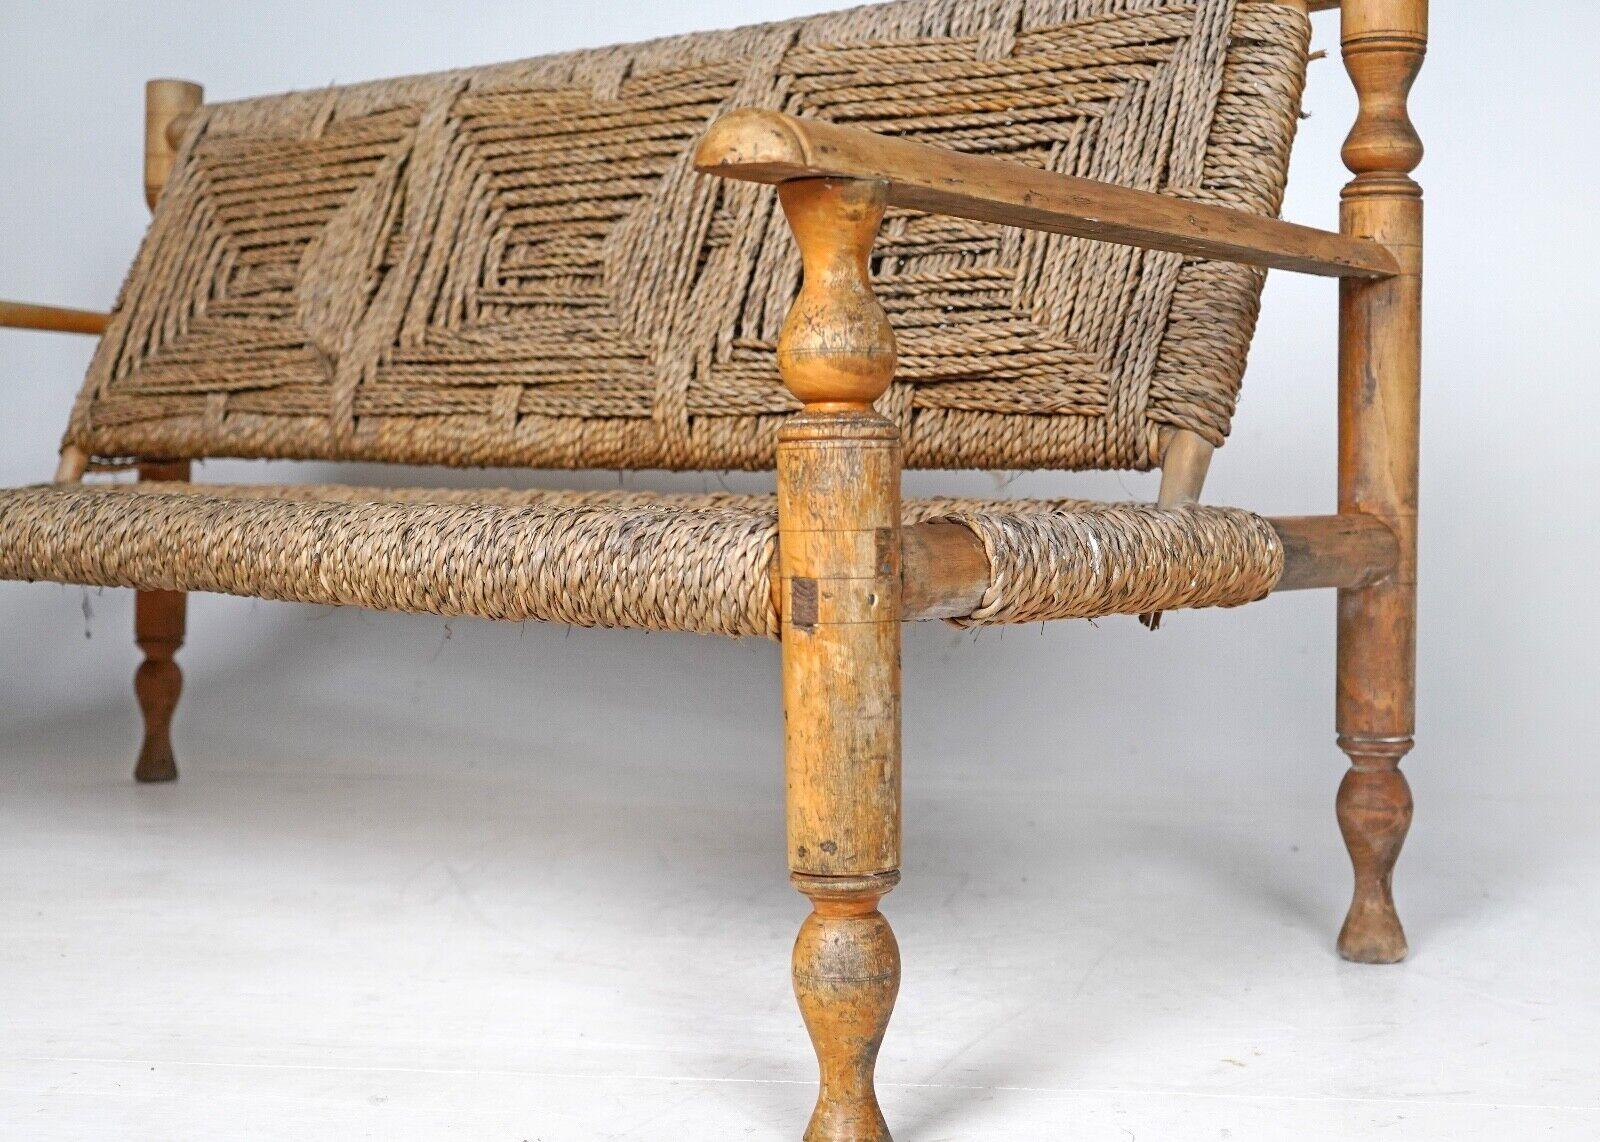 1950's French Bench by Adrien Audoux and Frida Minnet - Hemp Rope Seat  8